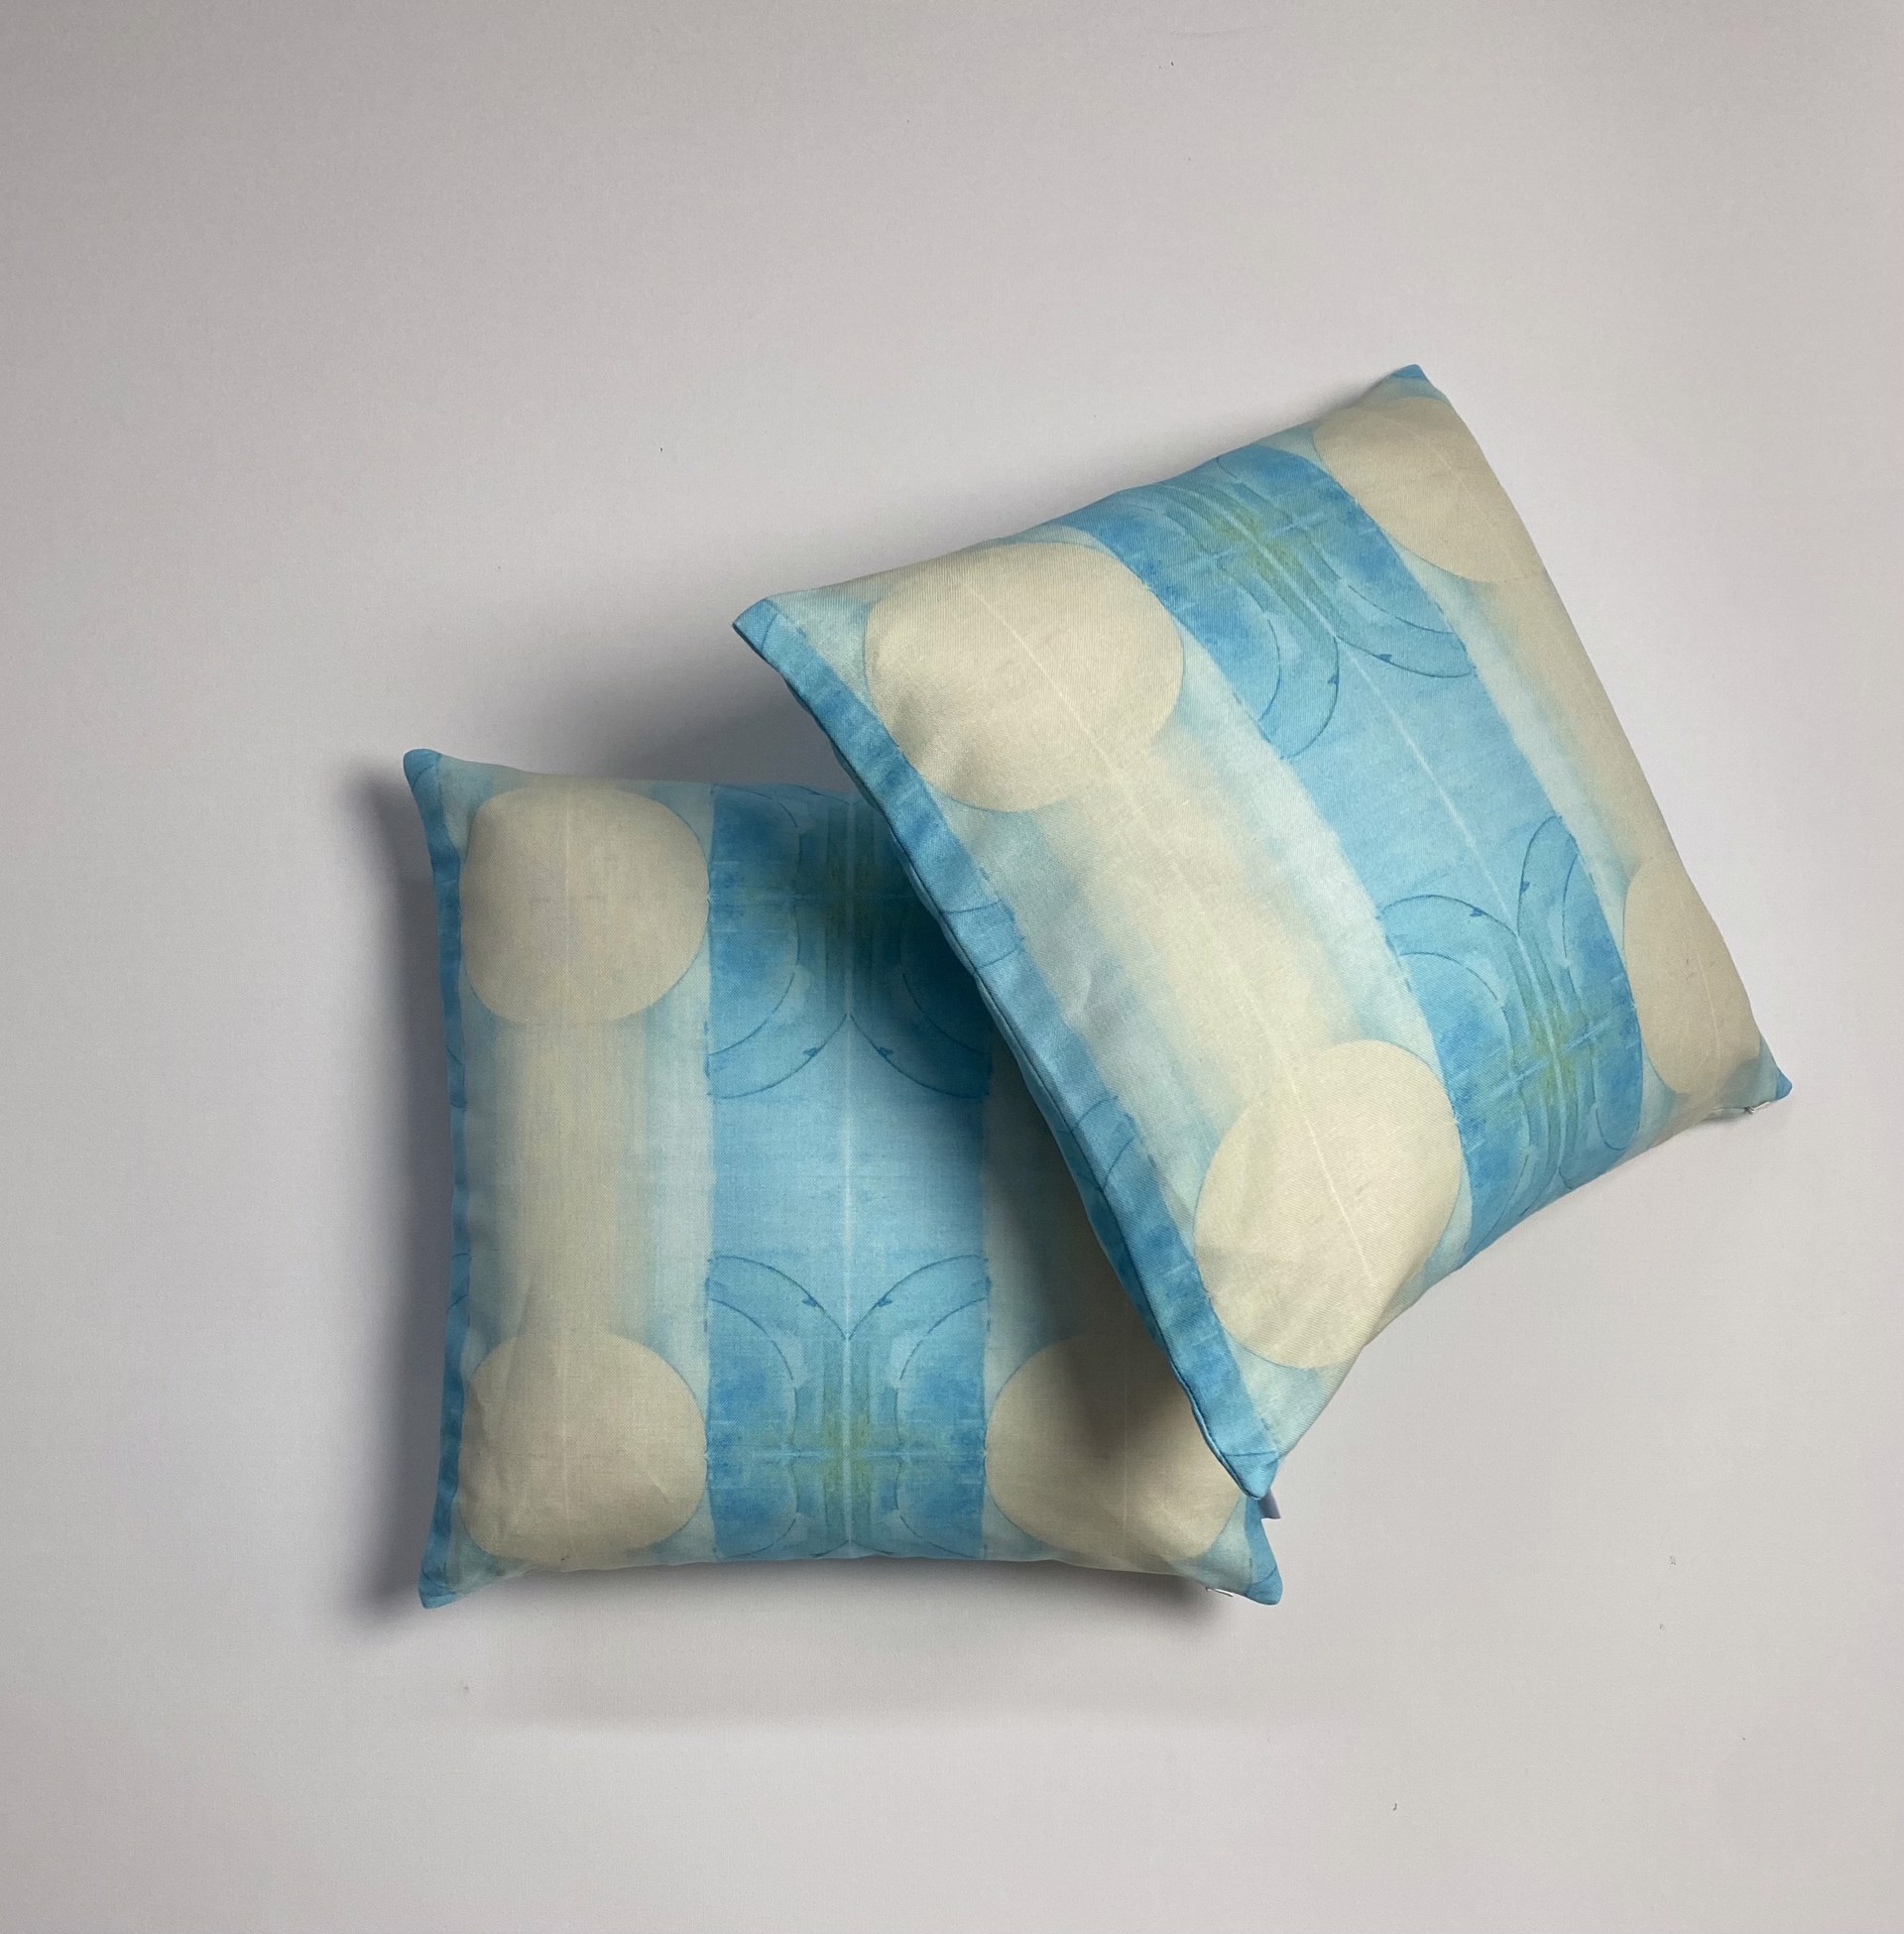 Luminous Pillow by Bethany Mabee